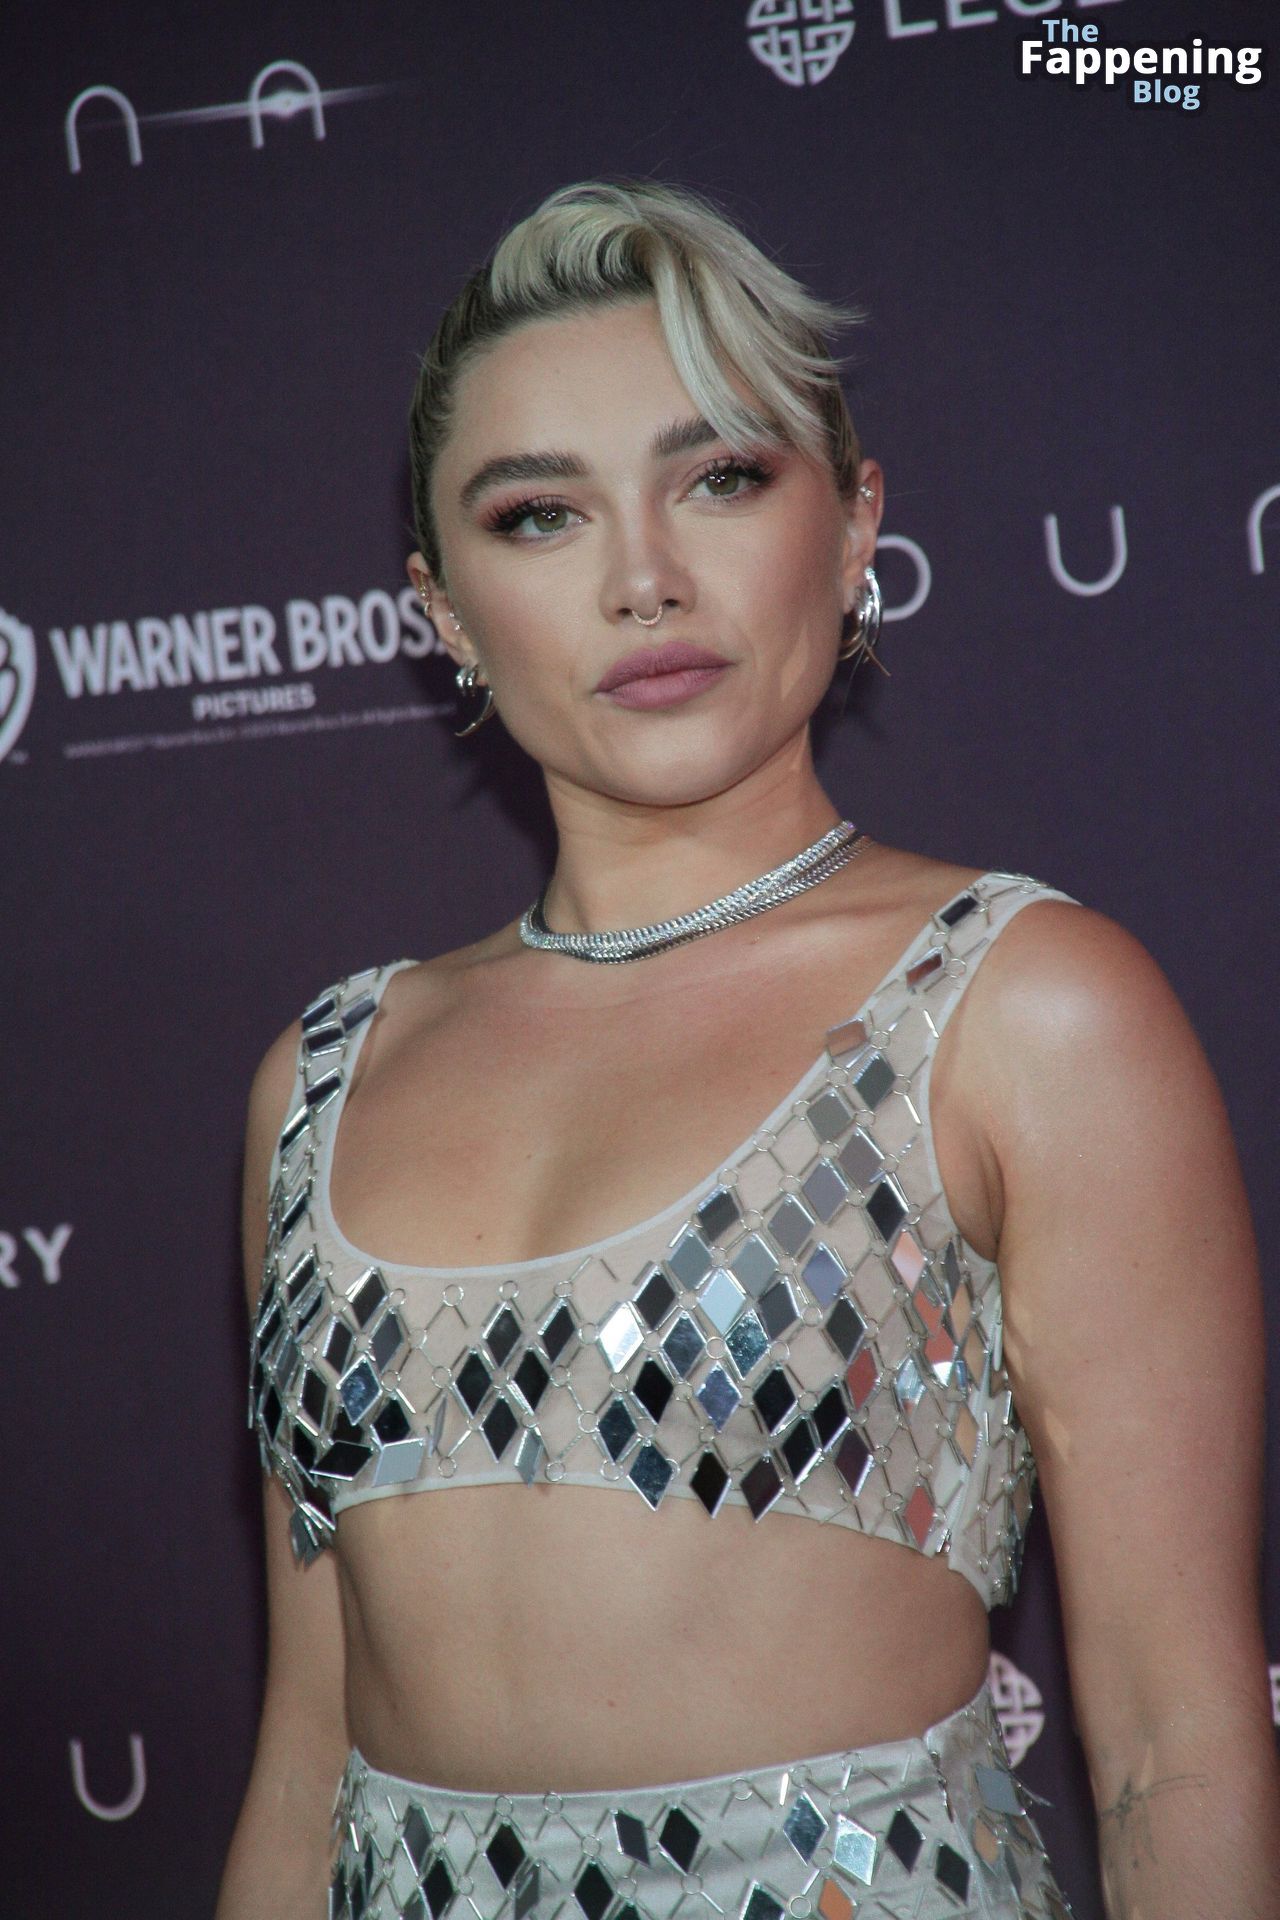 Florence-Pugh-Sexy-28-The-Fappening-Blog.jpg